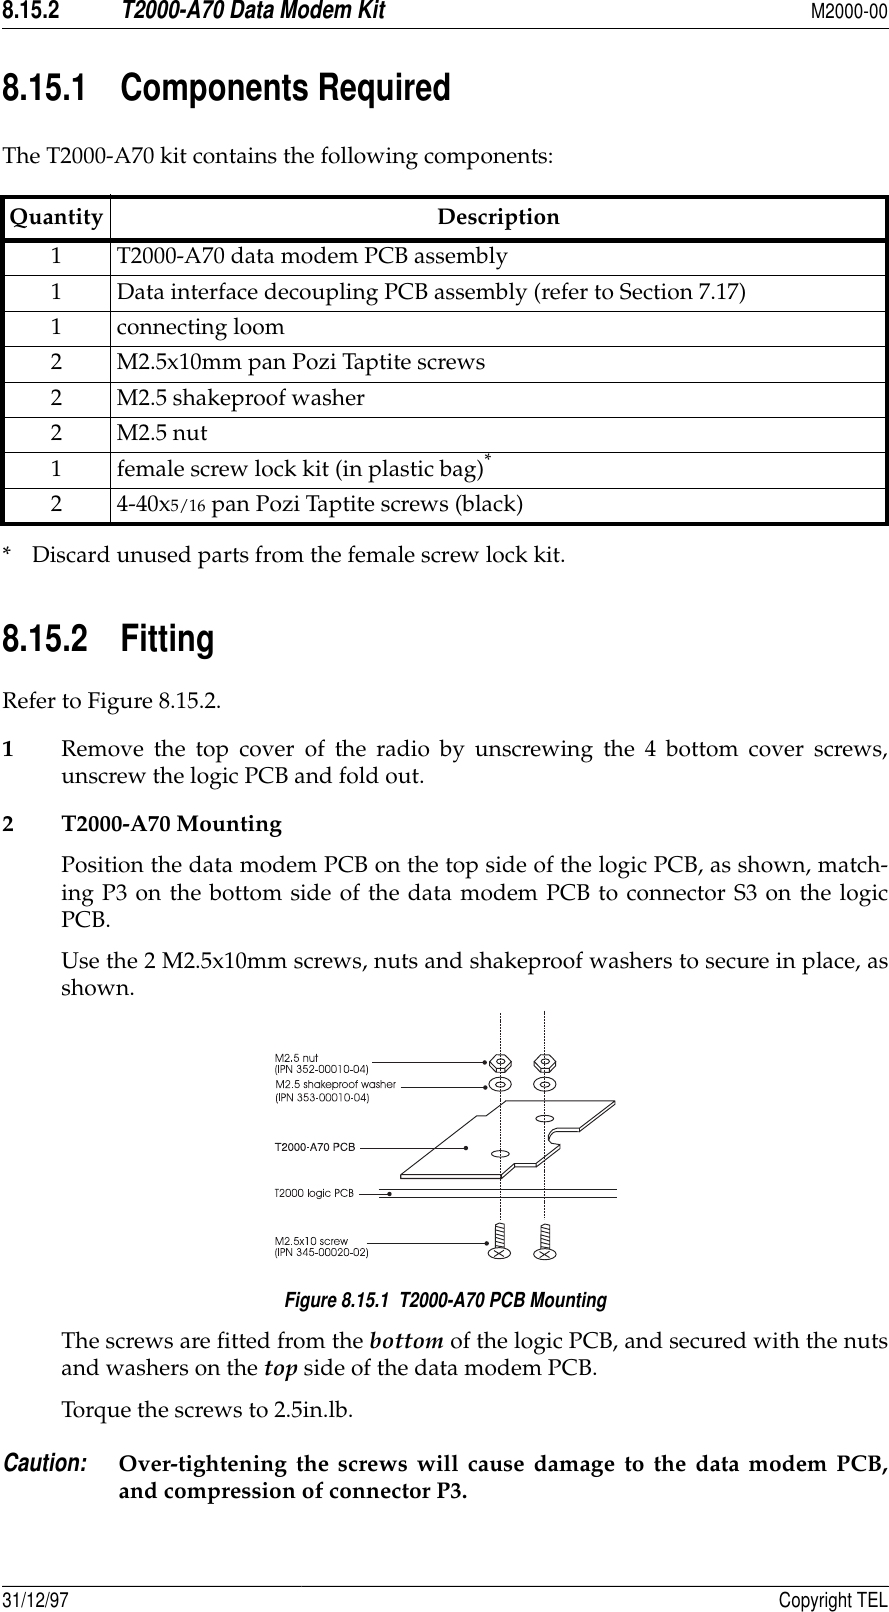 8.15.2T2000-A70 Data Modem KitM2000-0031/12/97 Copyright TEL8.15.1 Components Required The T2000-A70 kit contains the following components:8.15.2 Fitting Refer to Figure 8.15.2.1Remove the top cover of the radio by unscrewing the 4 bottom cover screws,unscrew the logic PCB and fold out.2 T2000-A70 MountingPosition the data modem PCB on the top side of the logic PCB, as shown, match-ing P3 on the bottom side of the data modem PCB to connector S3 on the logicPCB.Use the 2 M2.5x10mm screws, nuts and shakeproof washers to secure in place, asshown.Figure 8.15.1  T2000-A70 PCB MountingThe screws are fitted from the bottom of the logic PCB, and secured with the nutsand washers on the top side of the data modem PCB.Torque the screws to 2.5in.lb.Caution:Over-tightening the screws will cause damage to the data modem PCB,and compression of connector P3.* Discard unused parts from the female screw lock kit.Quantity Description1 T2000-A70 data modem PCB assembly1 Data interface decoupling PCB assembly (refer to Section 7.17)1 connecting loom2 M2.5x10mm pan Pozi Taptite screws2 M2.5 shakeproof washer2M2.5 nut1 female screw lock kit (in plastic bag)*24-40x5/16 pan Pozi Taptite screws (black)